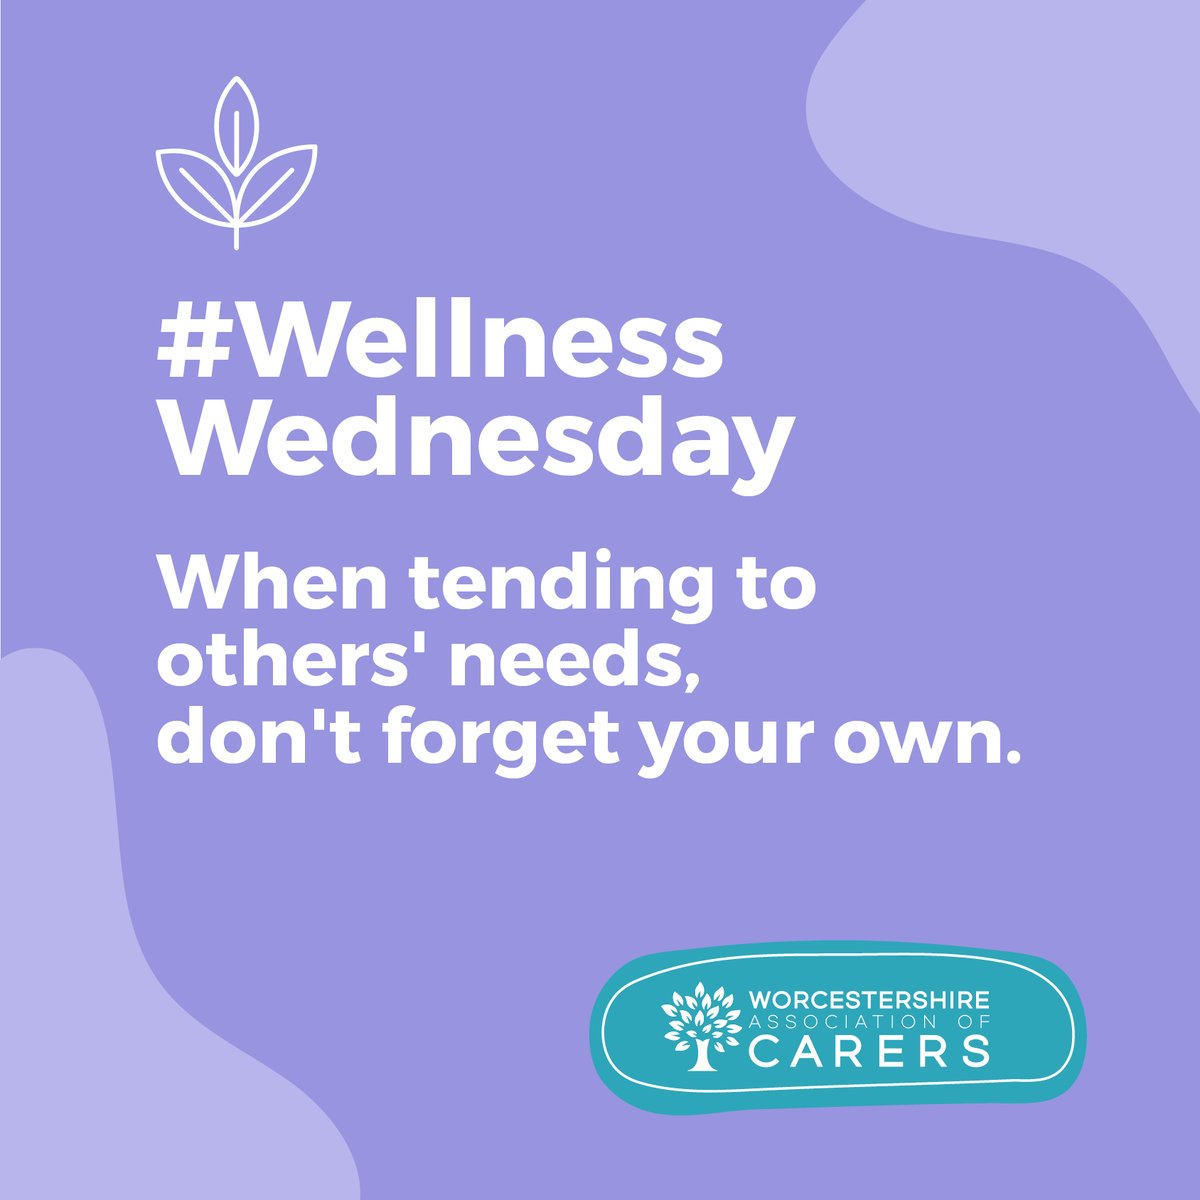 As a carer you put yourself last. But it's important to make sure you think about your own needs too.  #unpaidcarers #carerwellbeing #carersupport #worcestershire #mentalhealth #mentalwellbeing #selfcare #wellbeing #wellnesswednesdays #wednesdaywellness #we